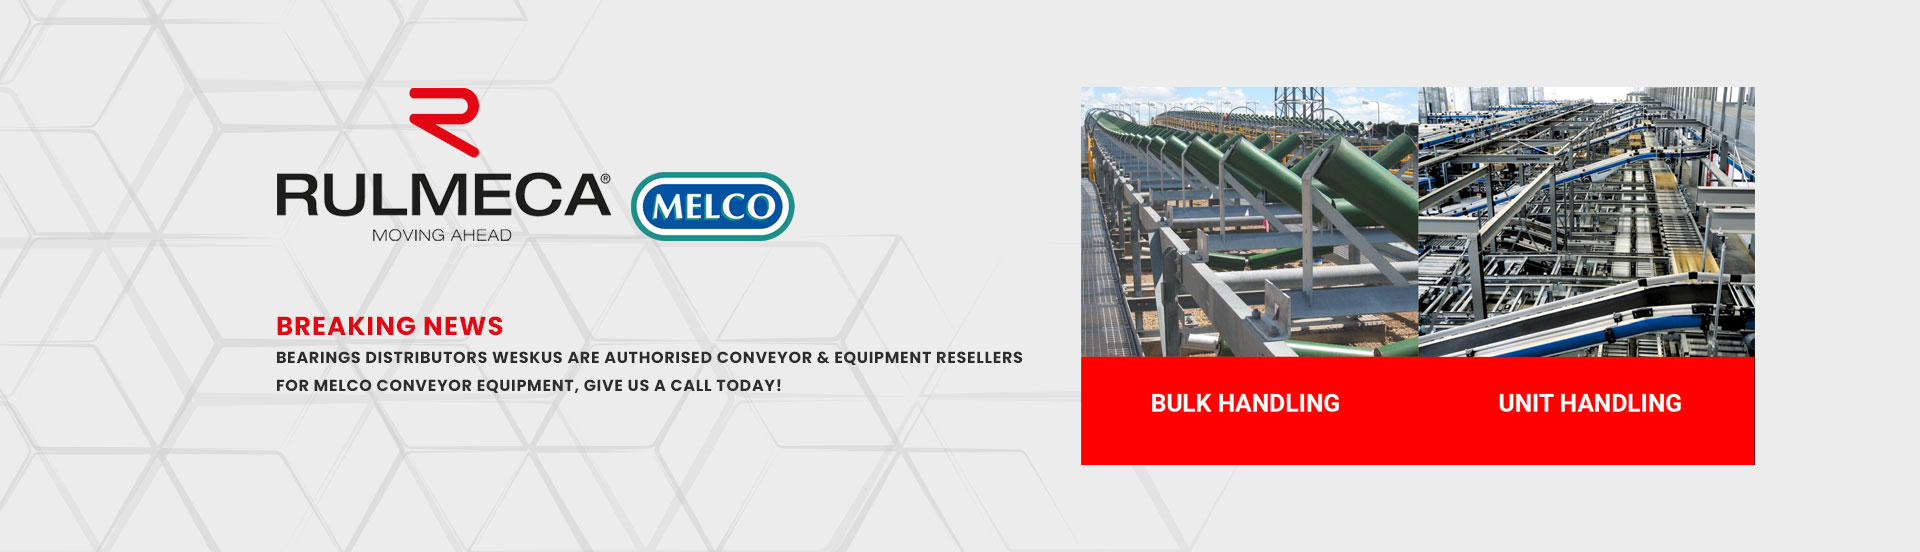 BD Weksus is a distributor of Melco Conveyor Equipment